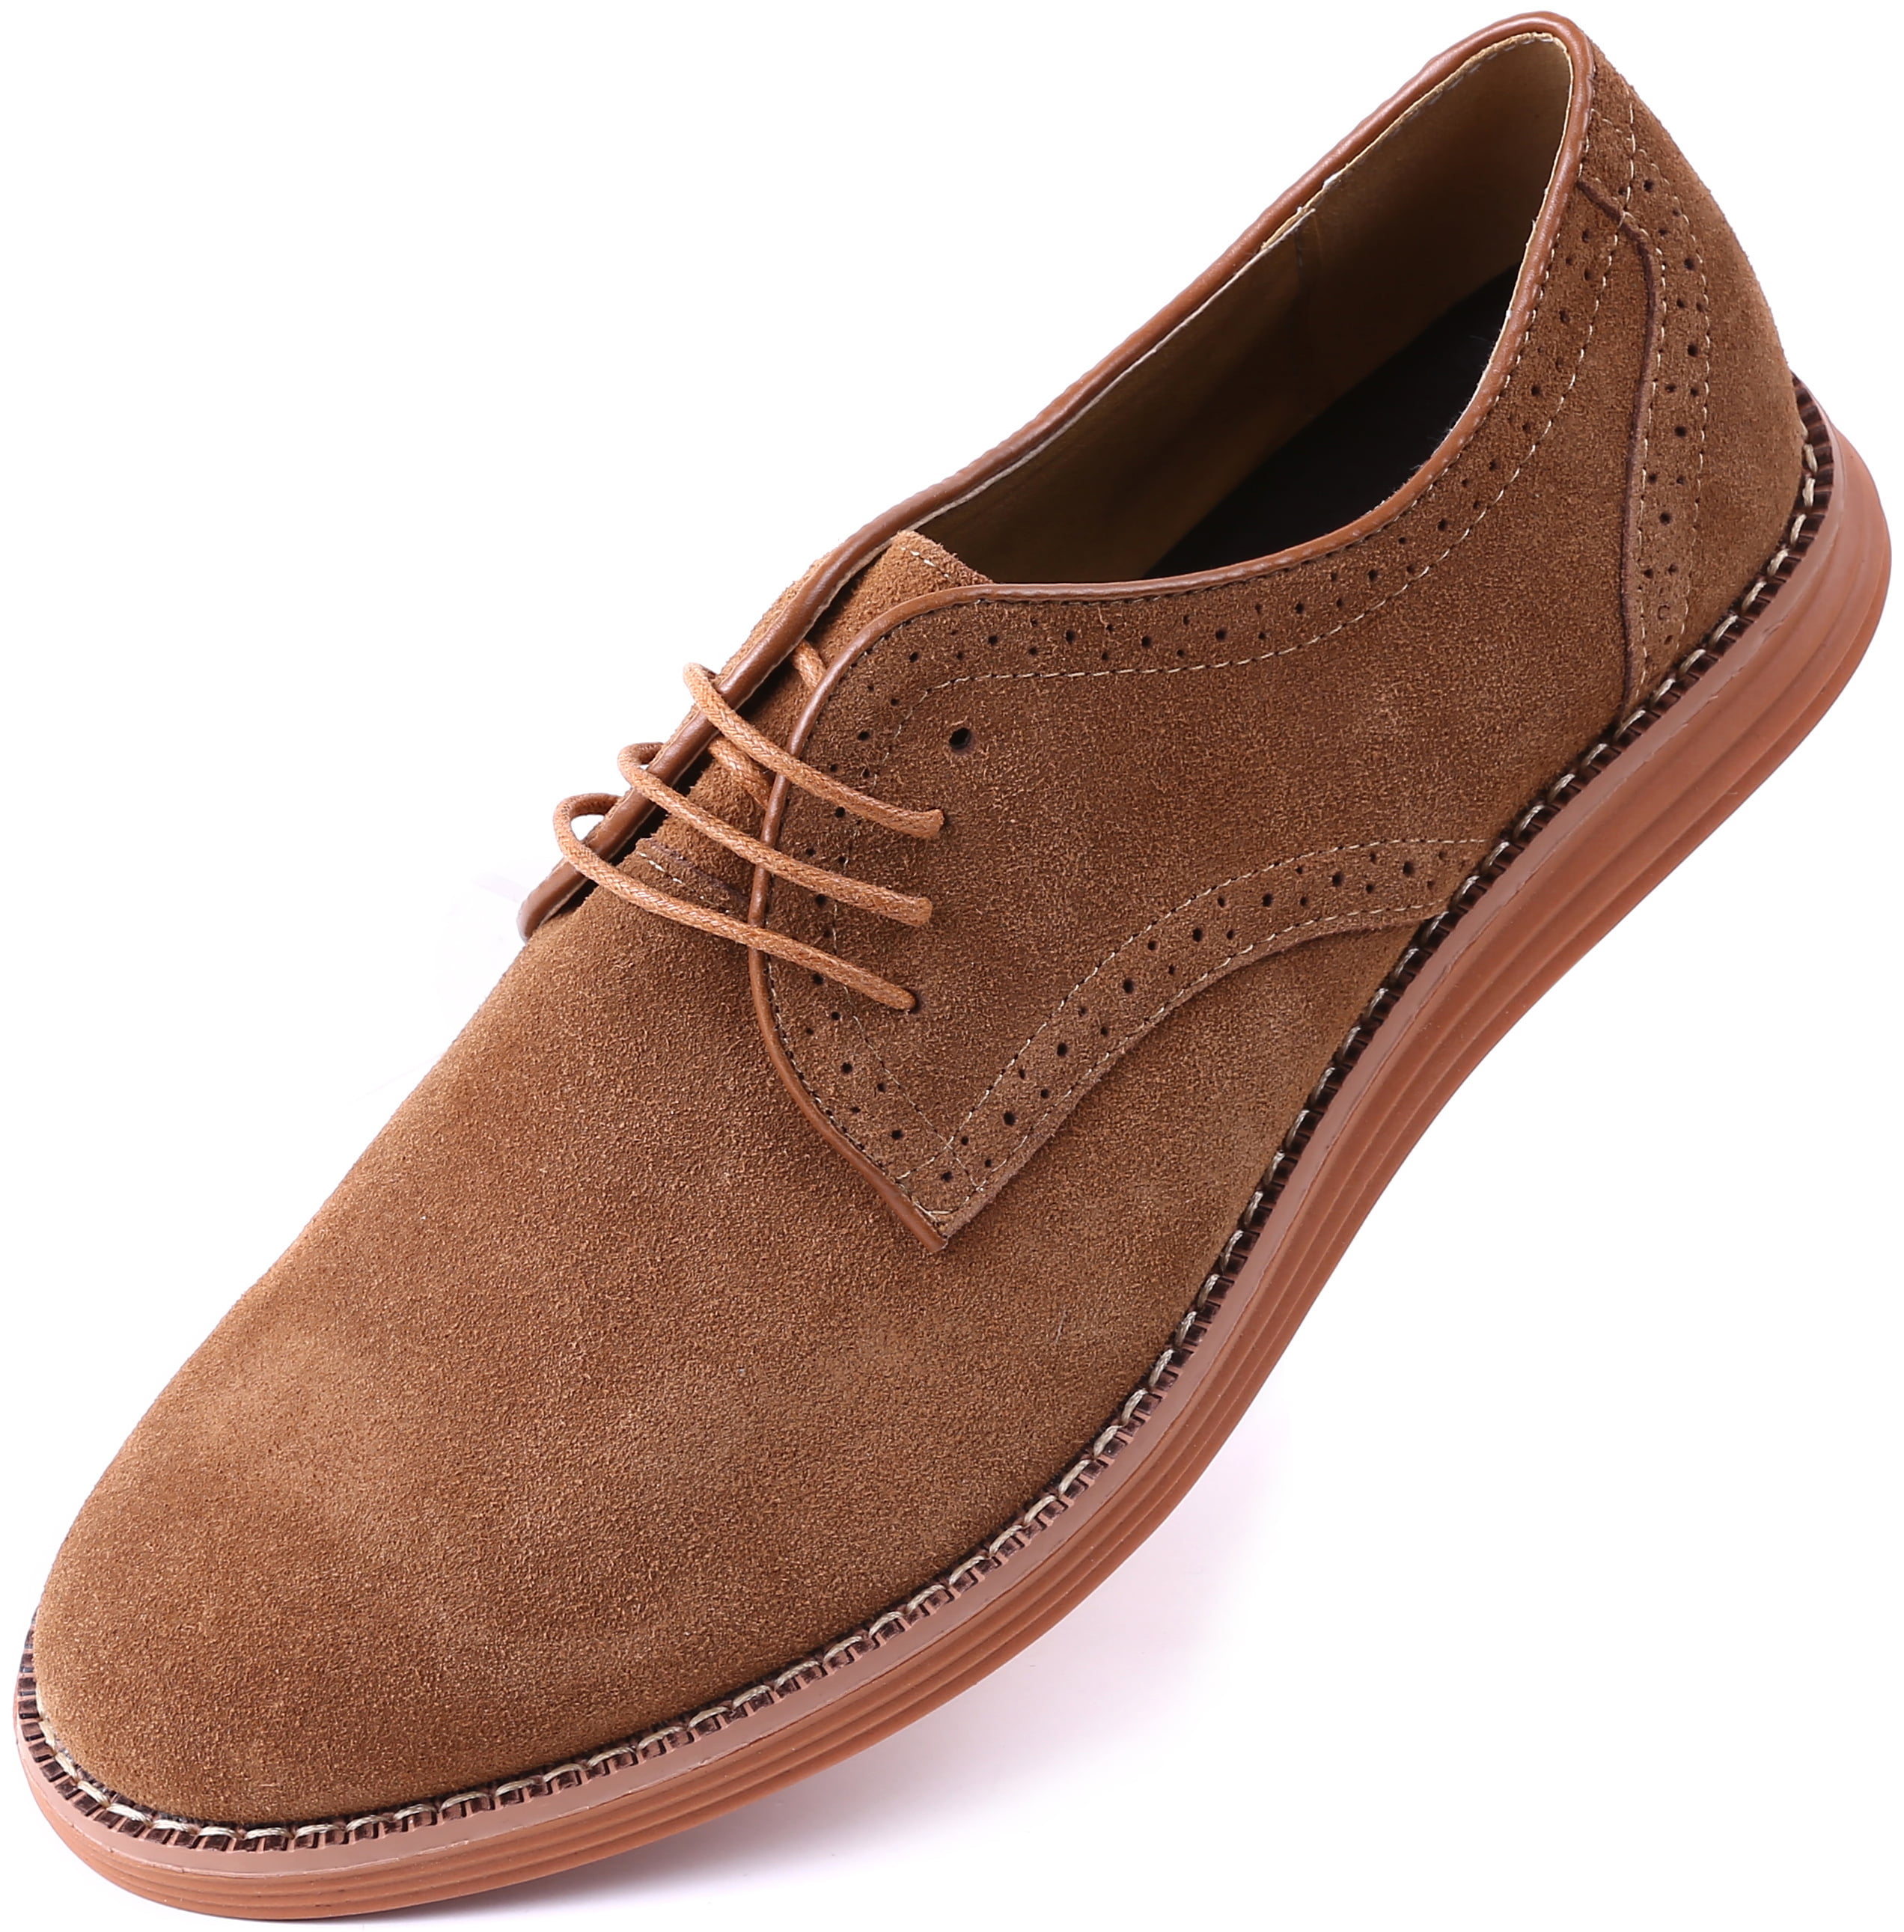 men's business casual oxford shoes